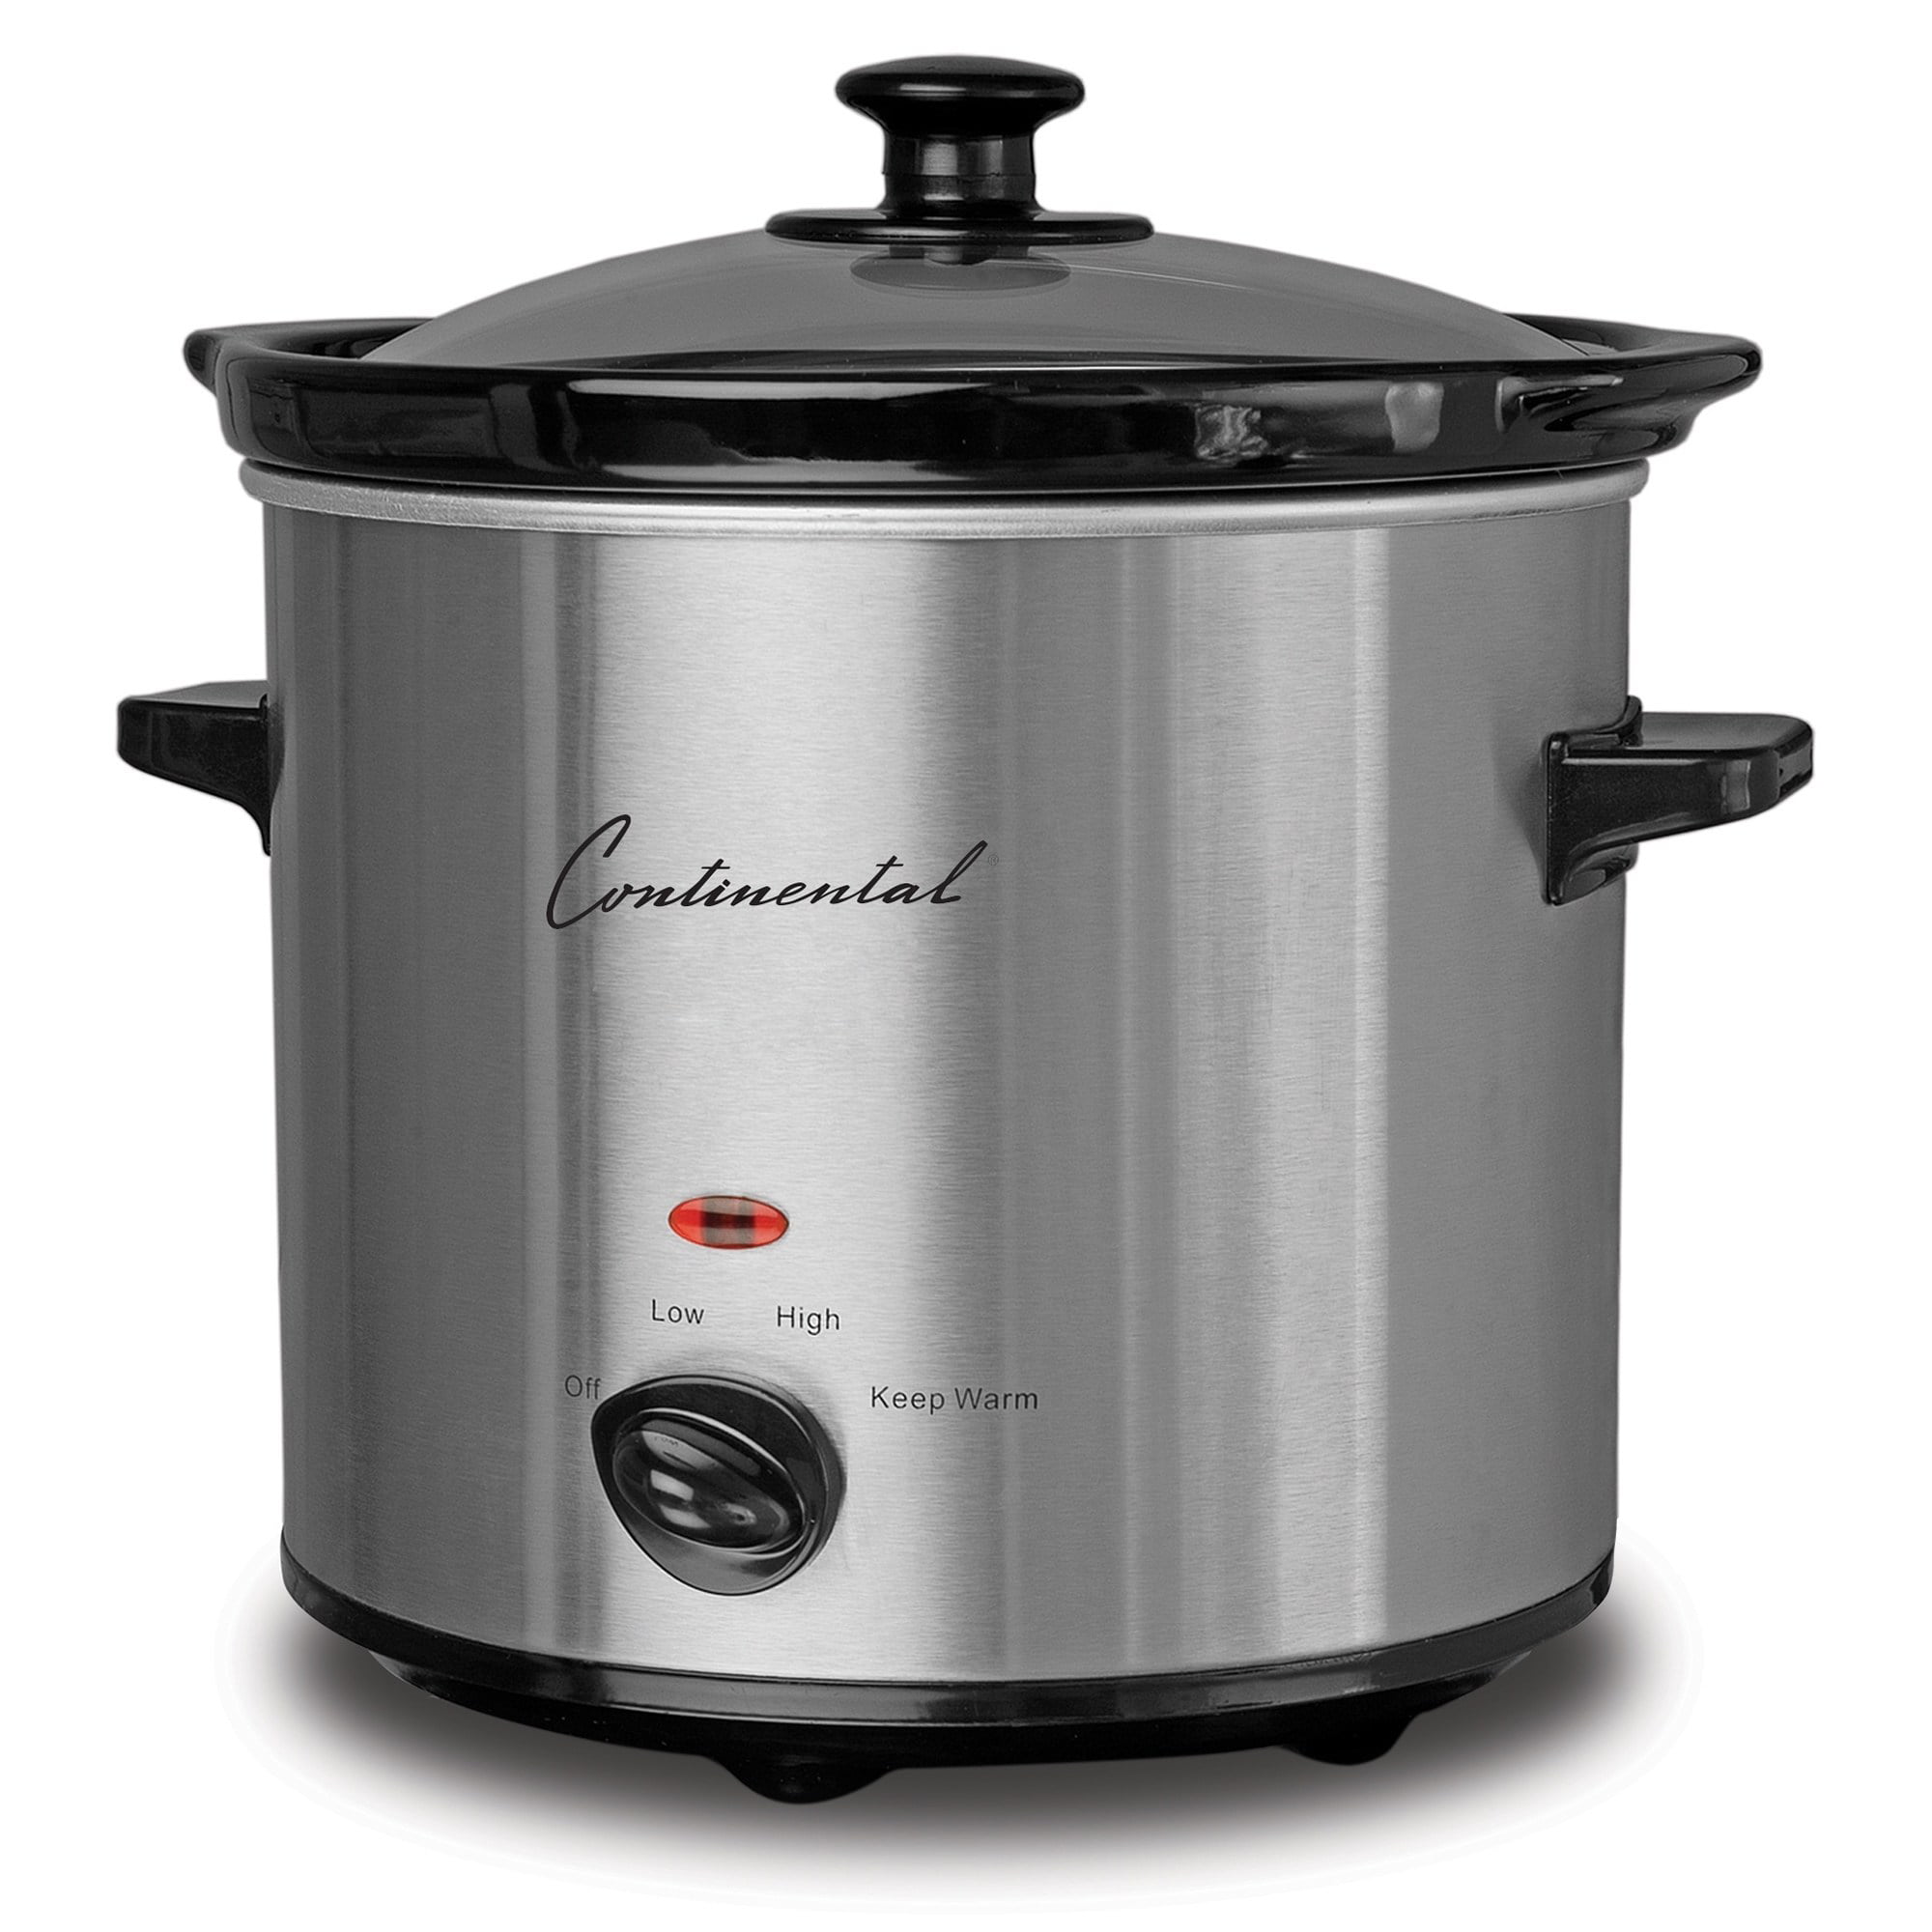 Courant 3.2 qt. Crock Slow Cooker, Dishwasher Safe, Stainproof Pot and Glass Lid Red Stainless Steel